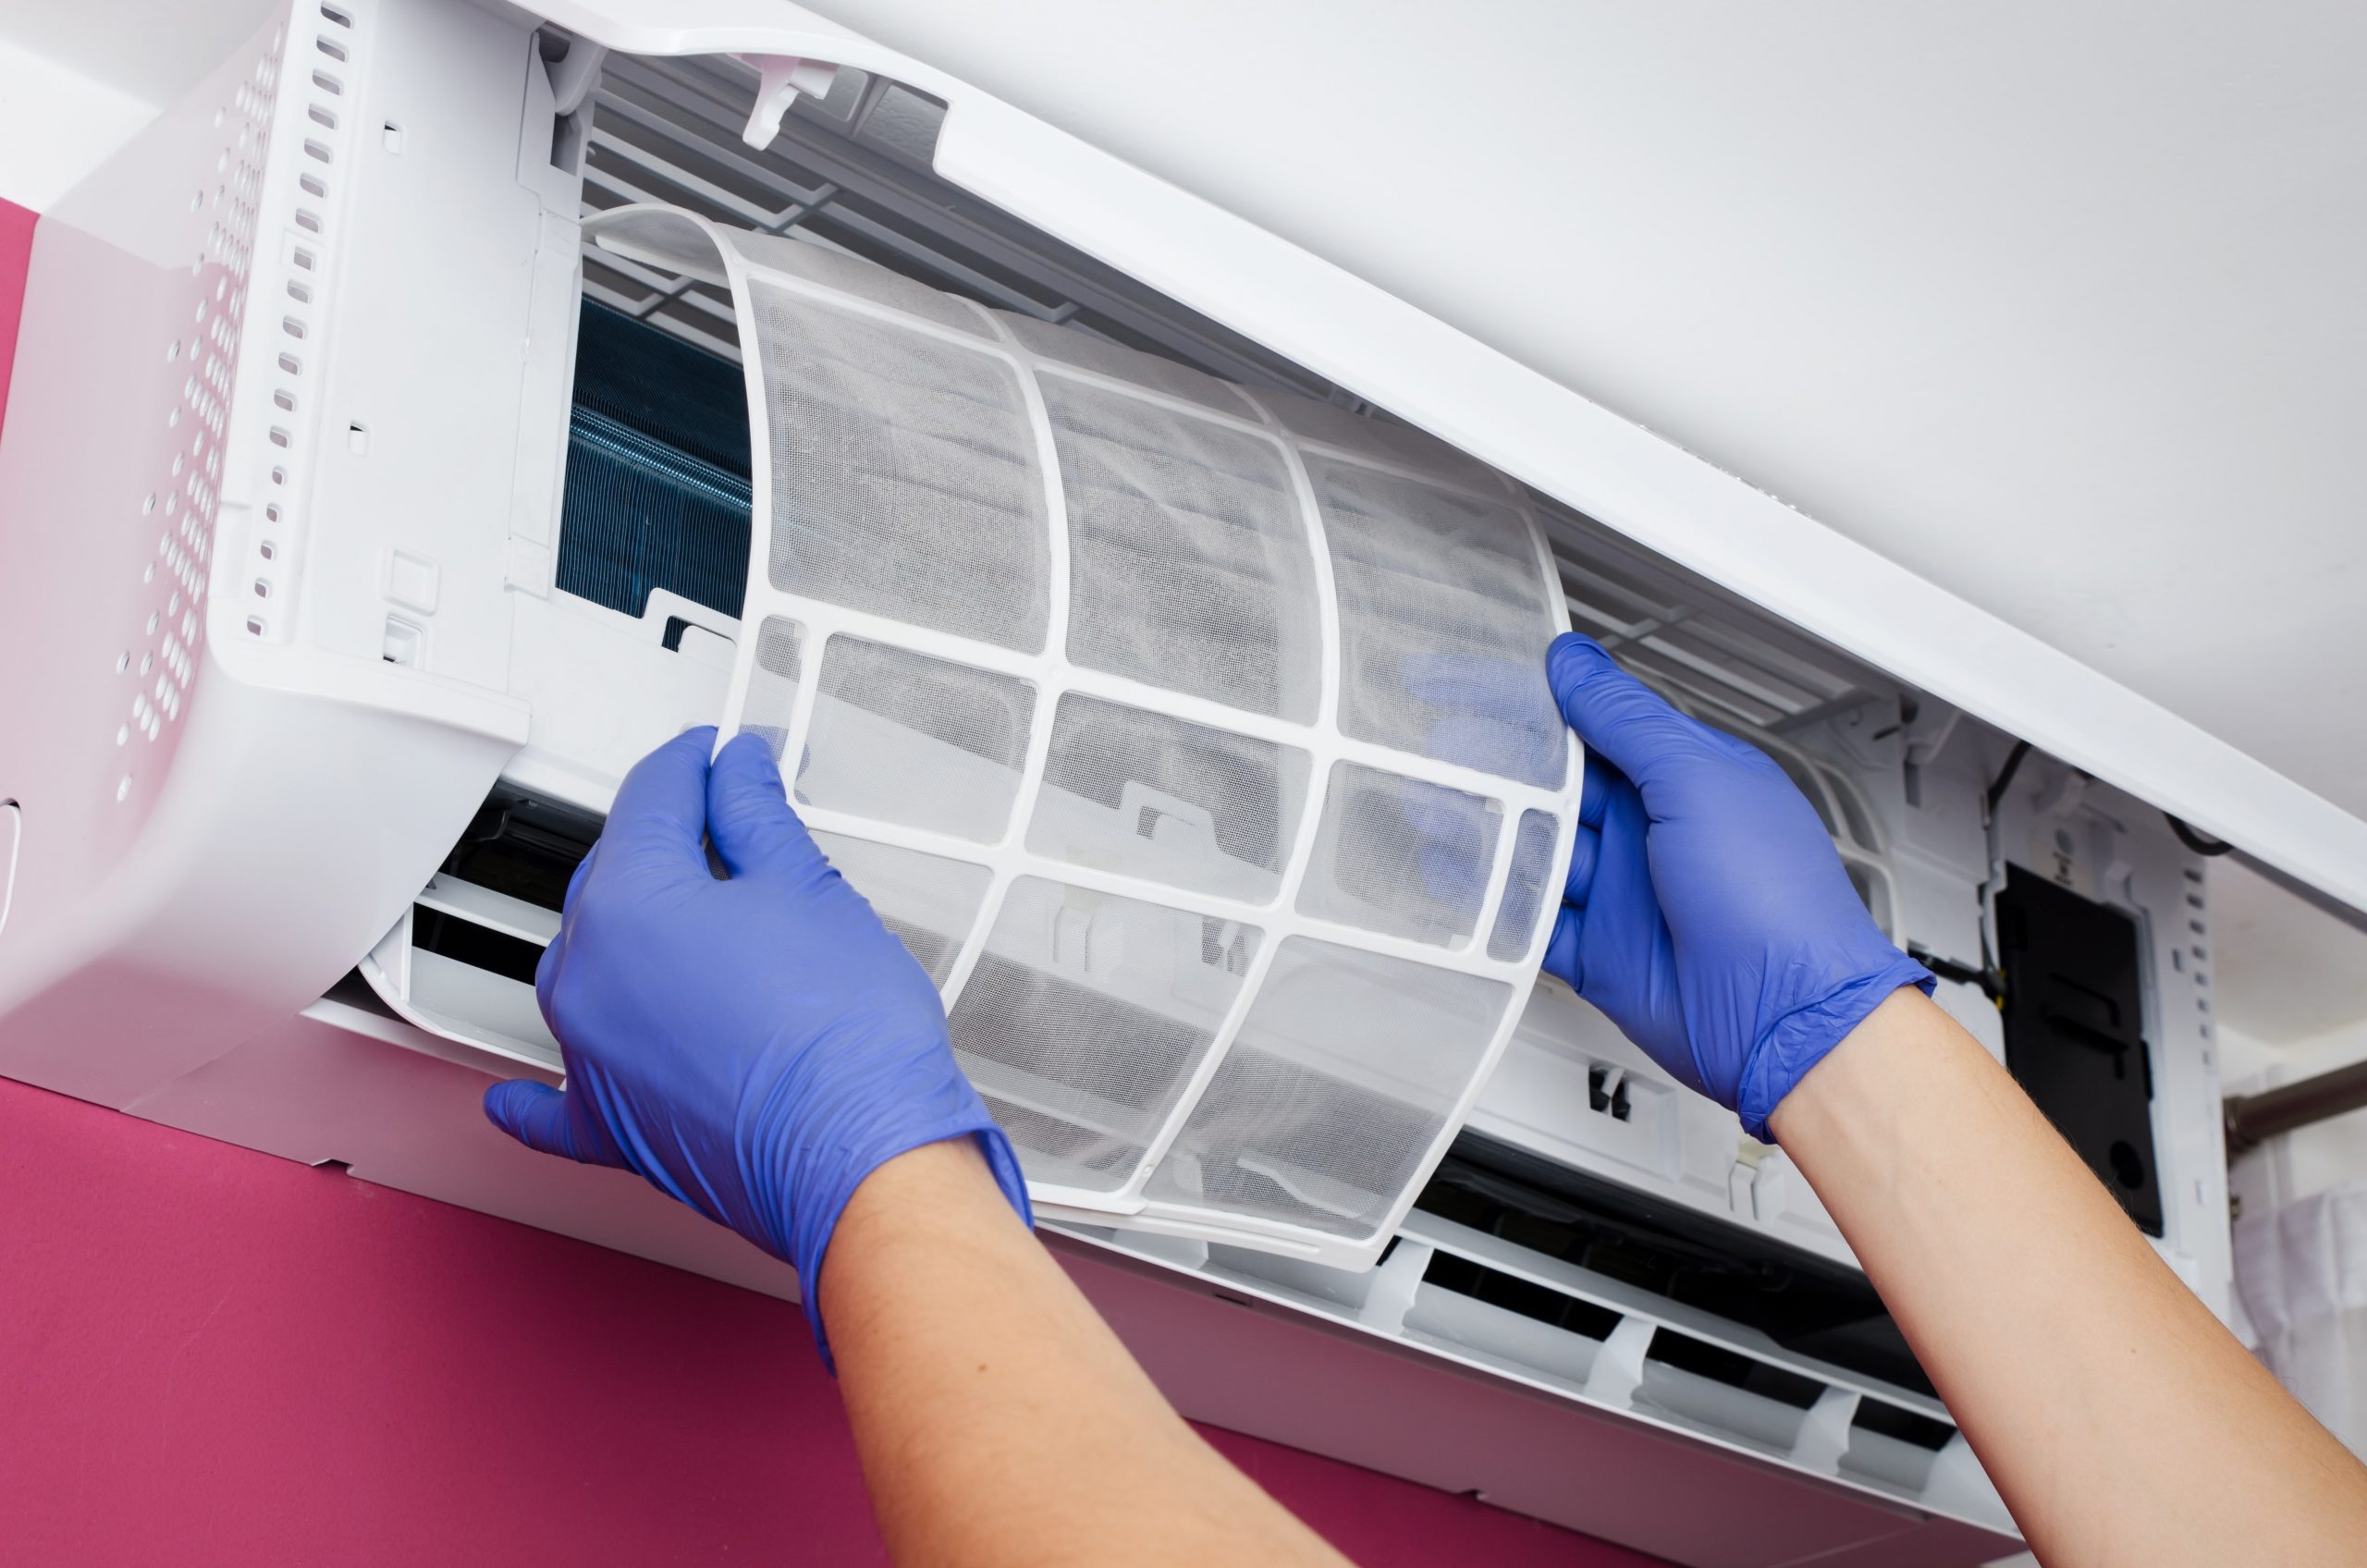 arms with blue gloves removing an air conditioning filter from a split system air conditioner